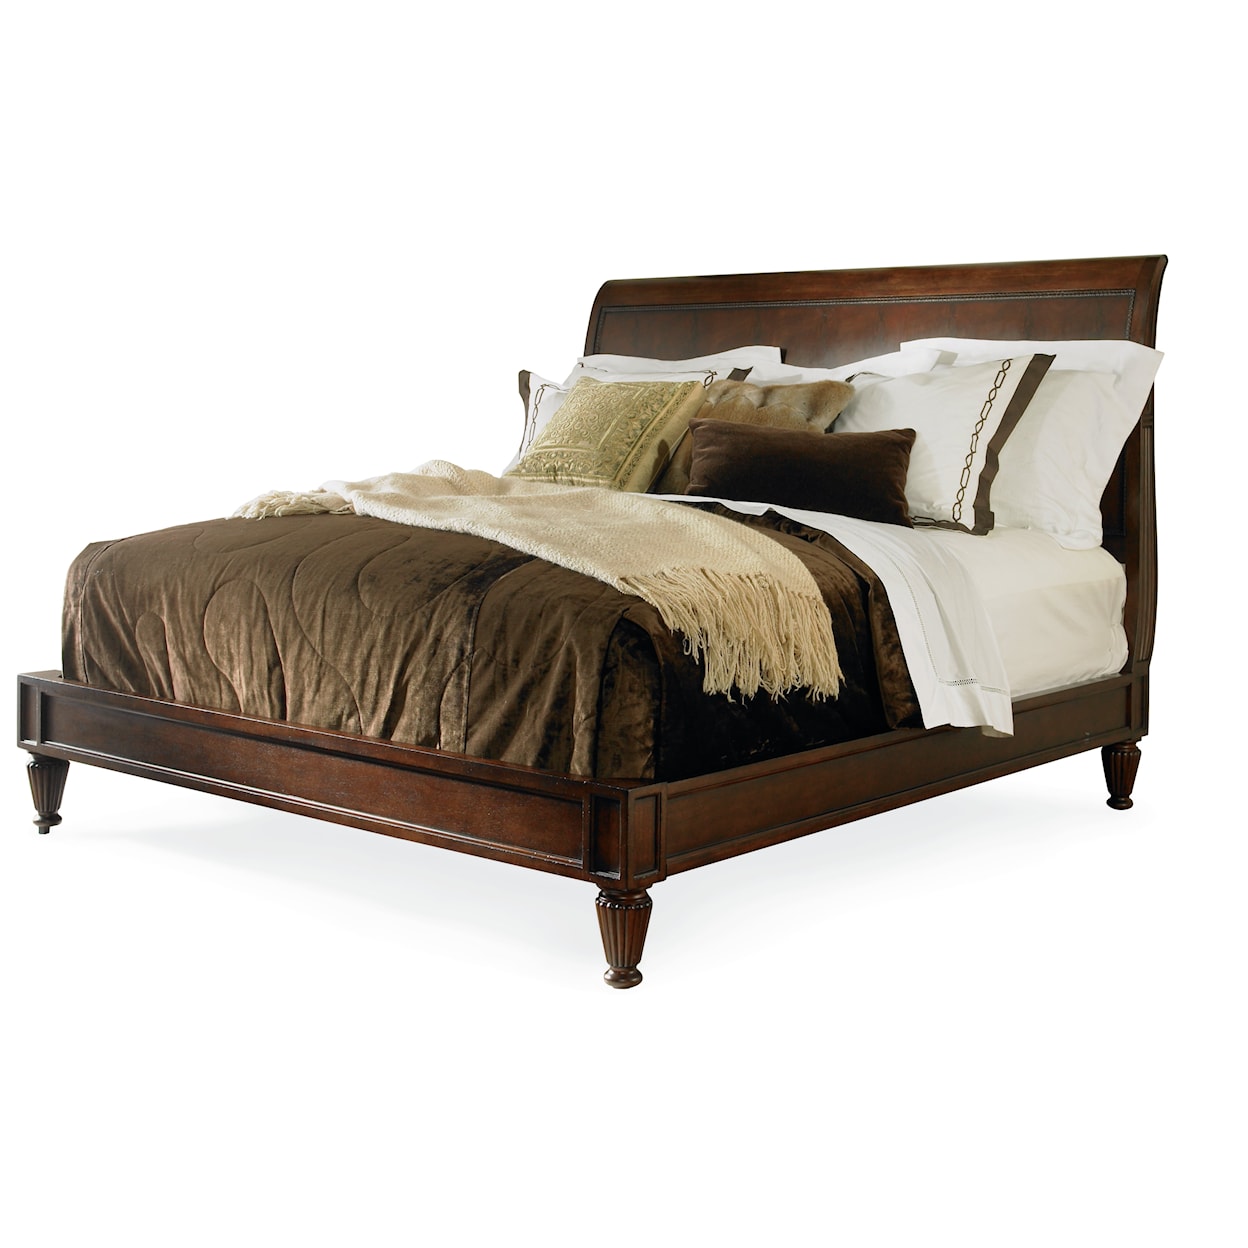 Century Chelsea Club King Bed